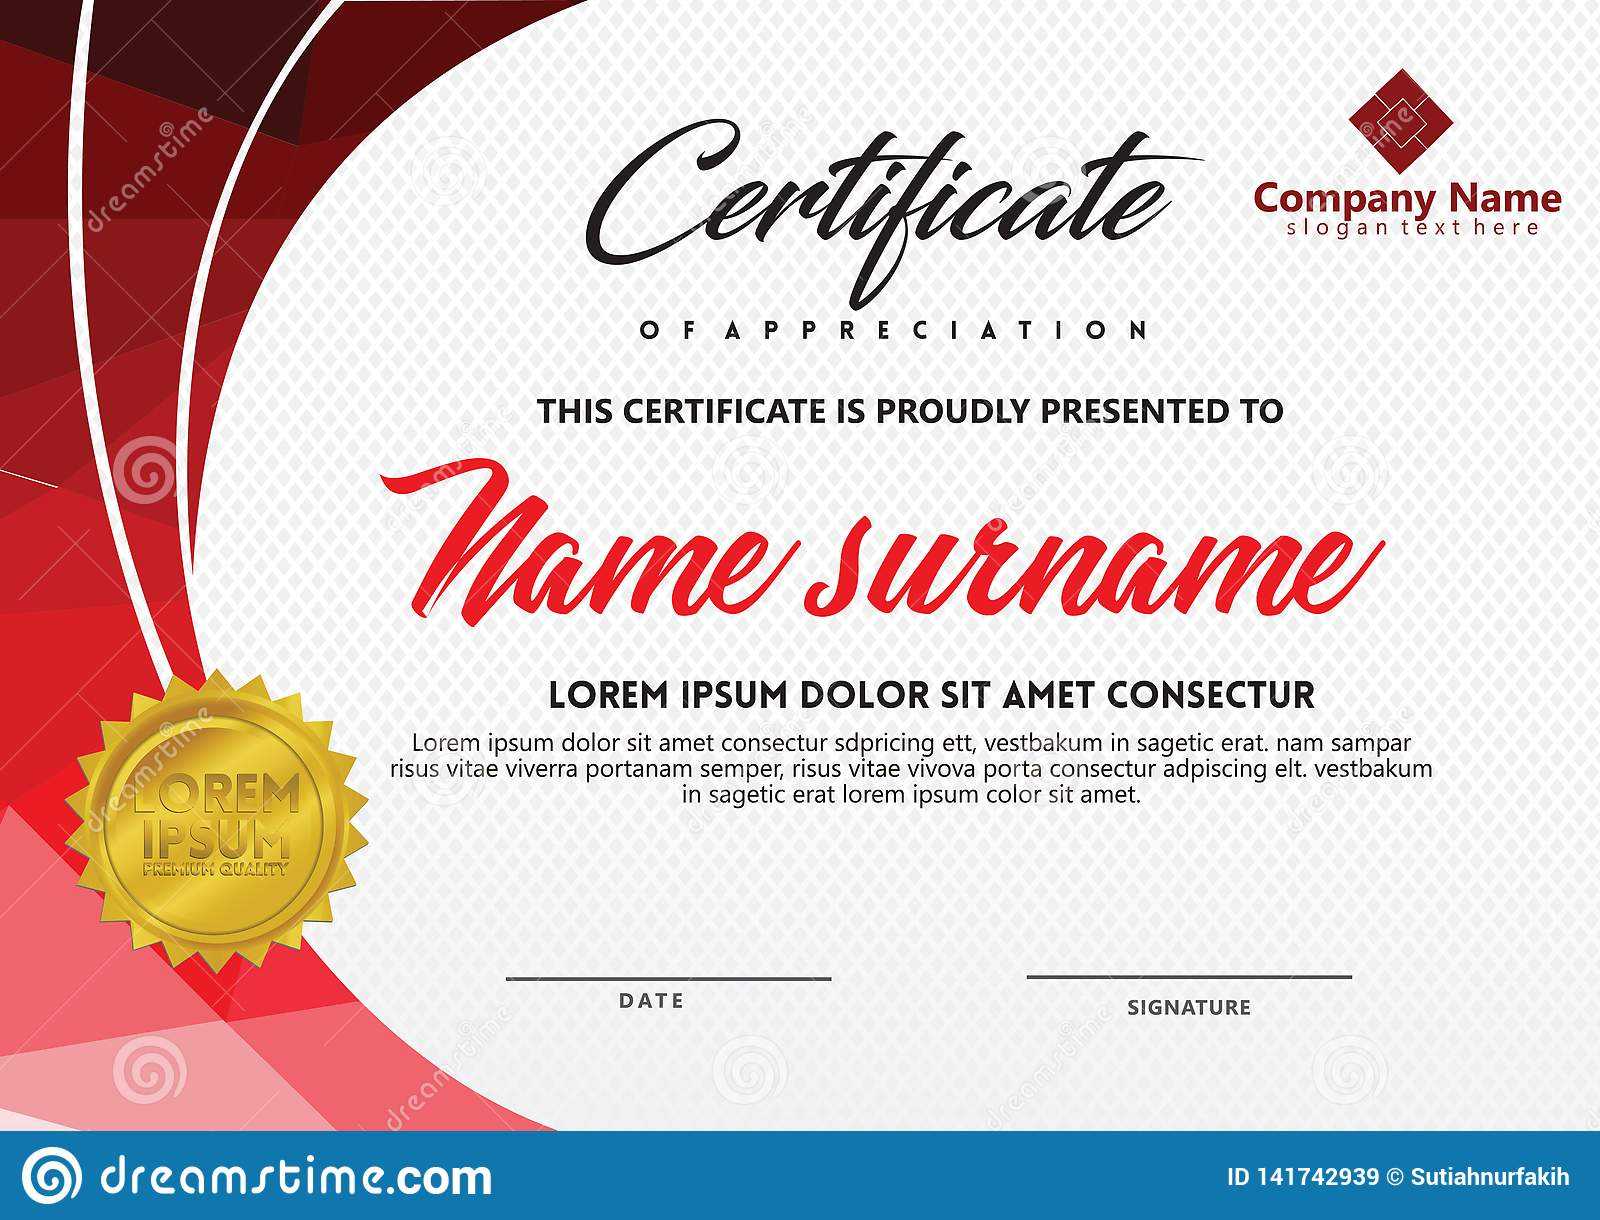 Certificate Template With Polygonal Style And Modern Pattern Intended For Workshop Certificate Template